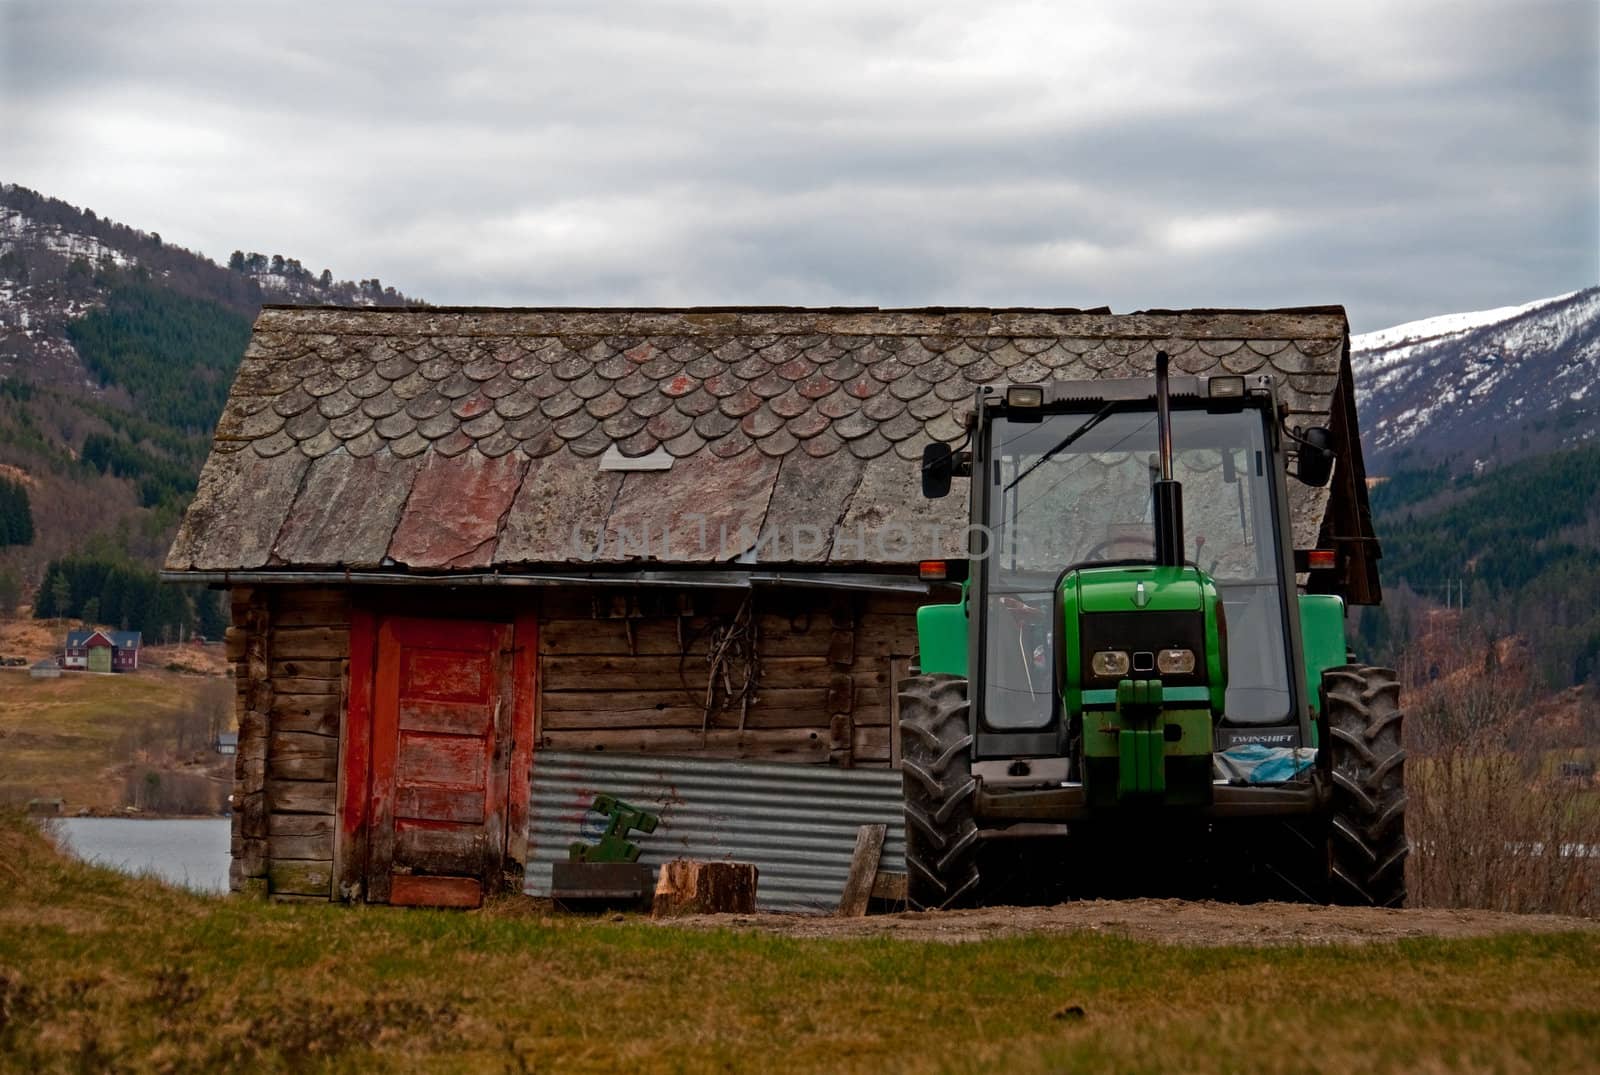 A green tractor standing in front of an old shed